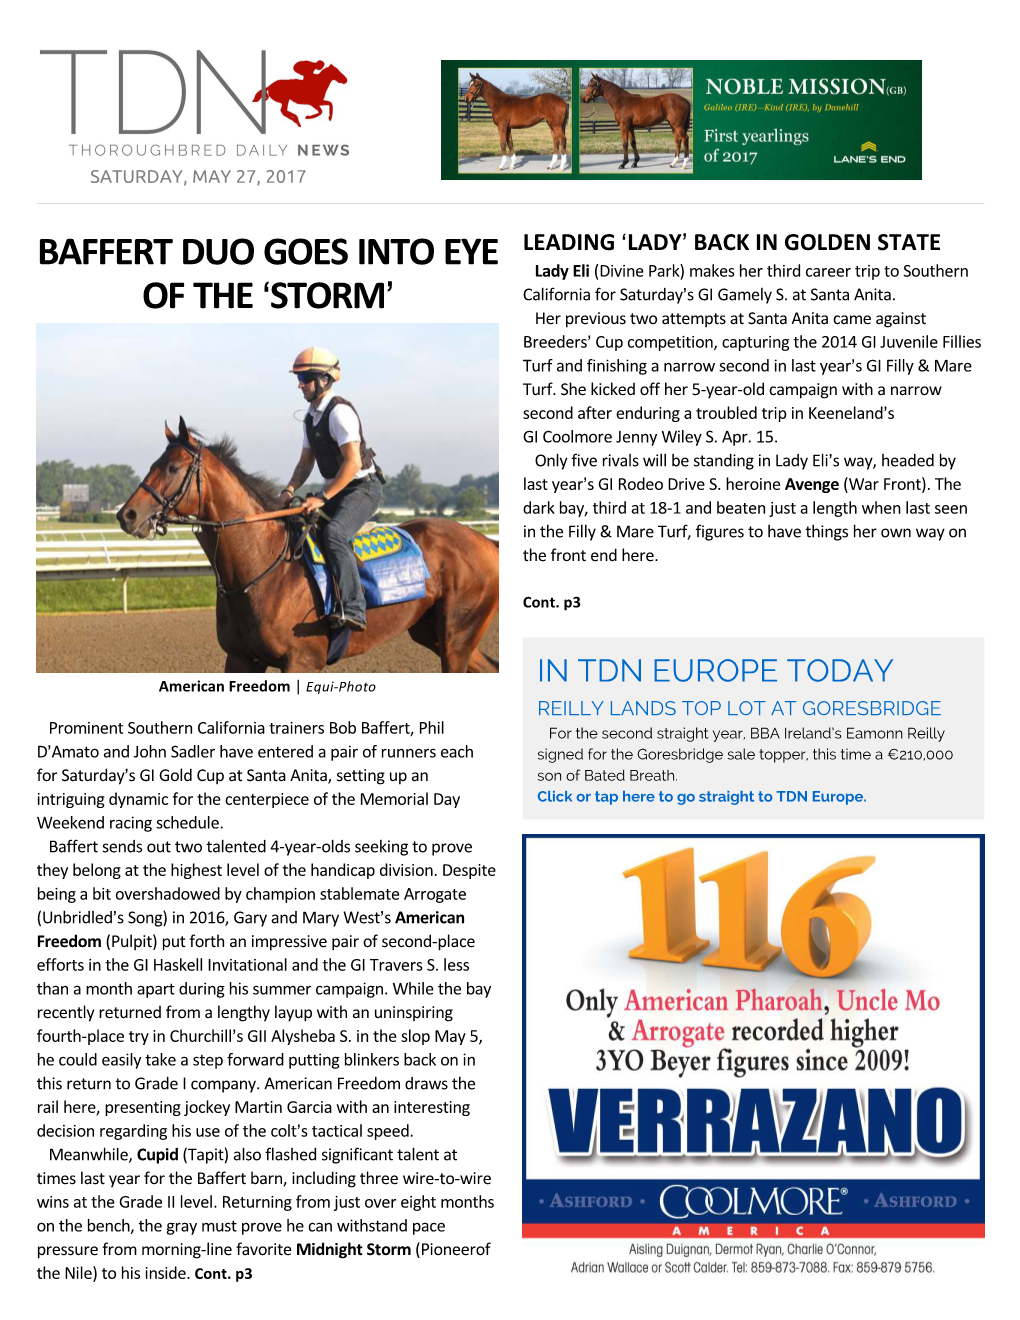 BAFFERT DUO GOES INTO EYE of the &gt;STORM=